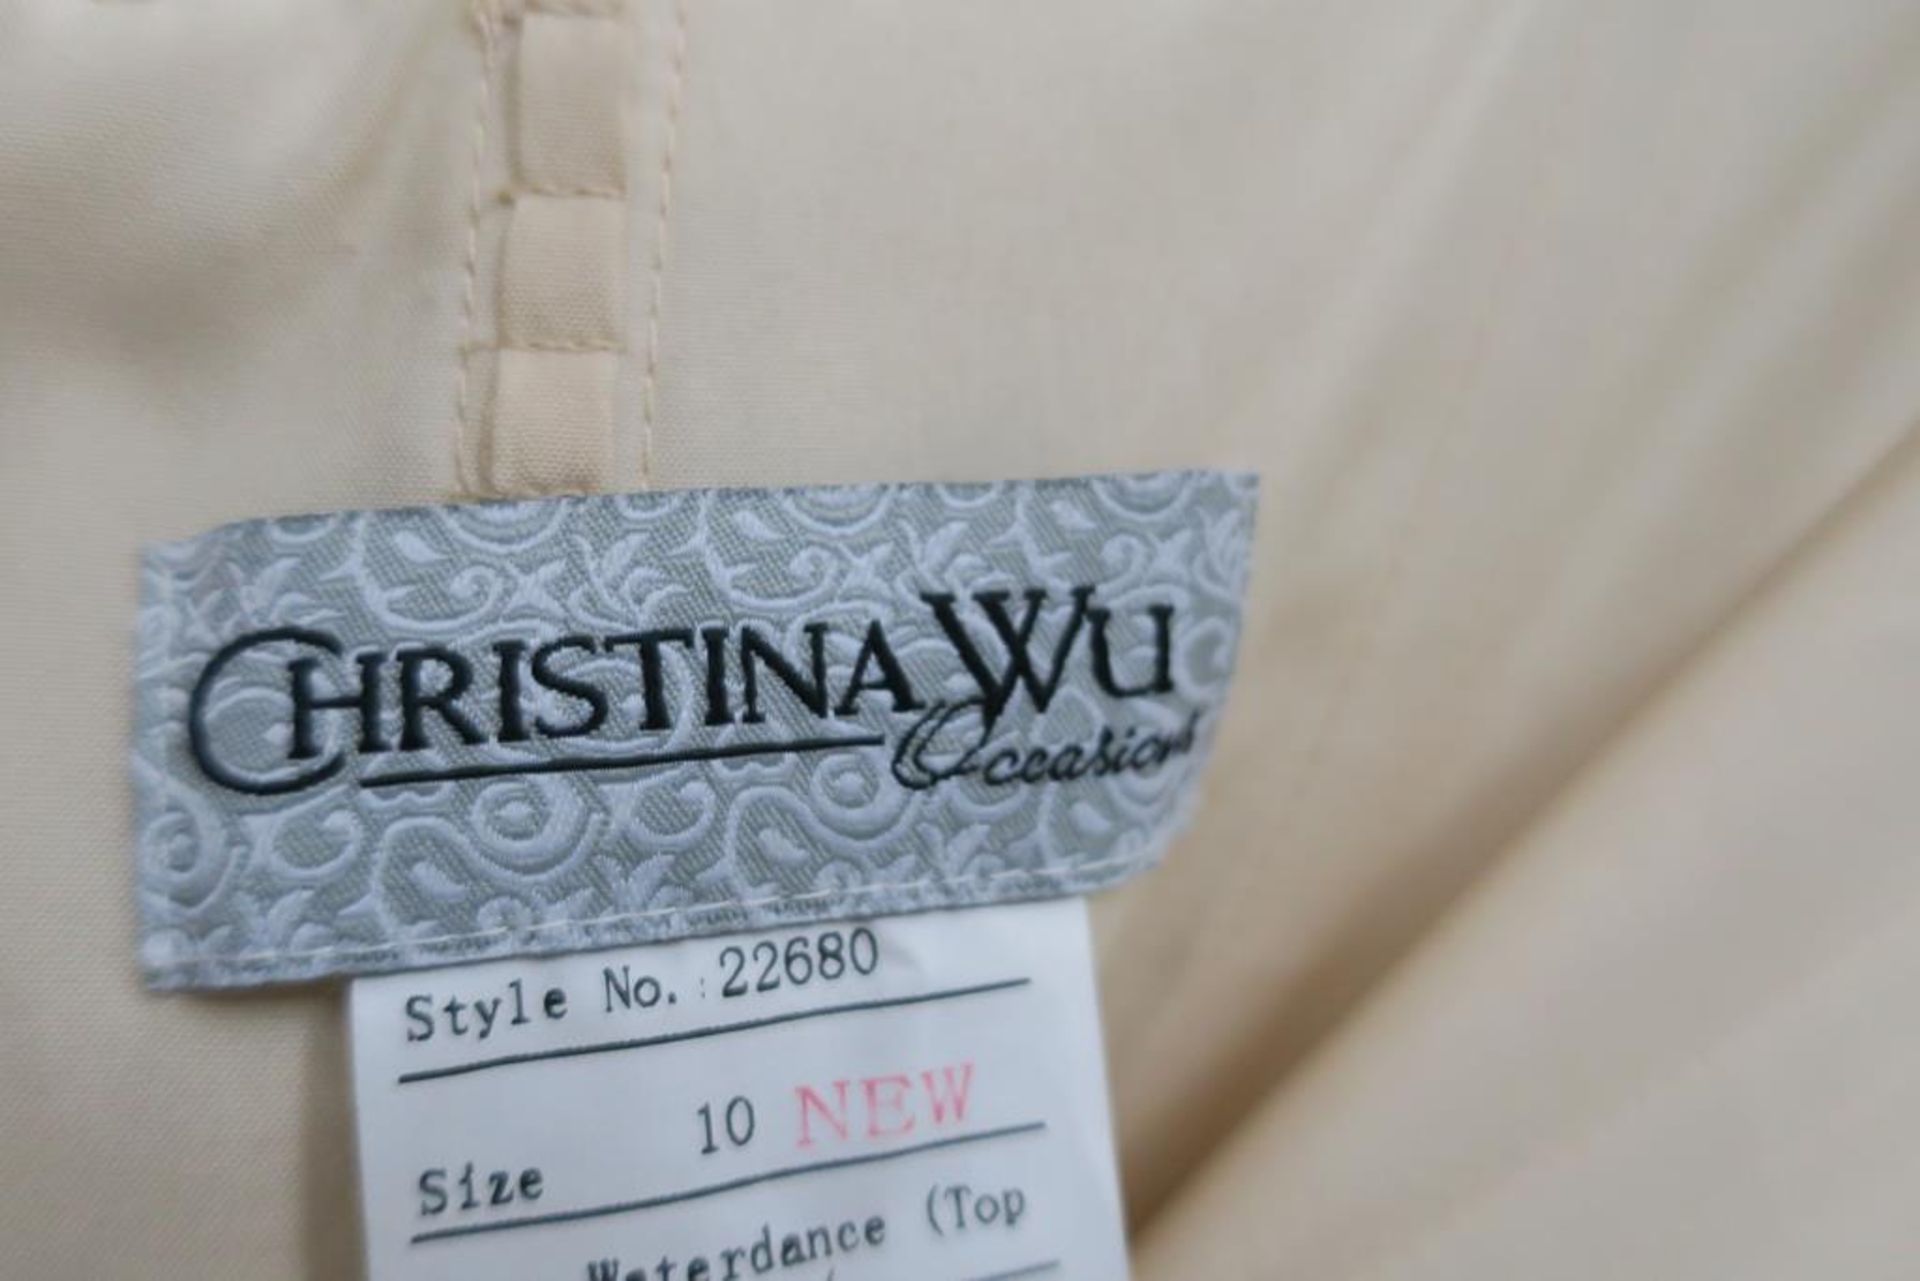 * Four Ladies Formal Wear Dresses labelled as size 10 and branded Christina Wu and Romantica. Styles - Image 2 of 6